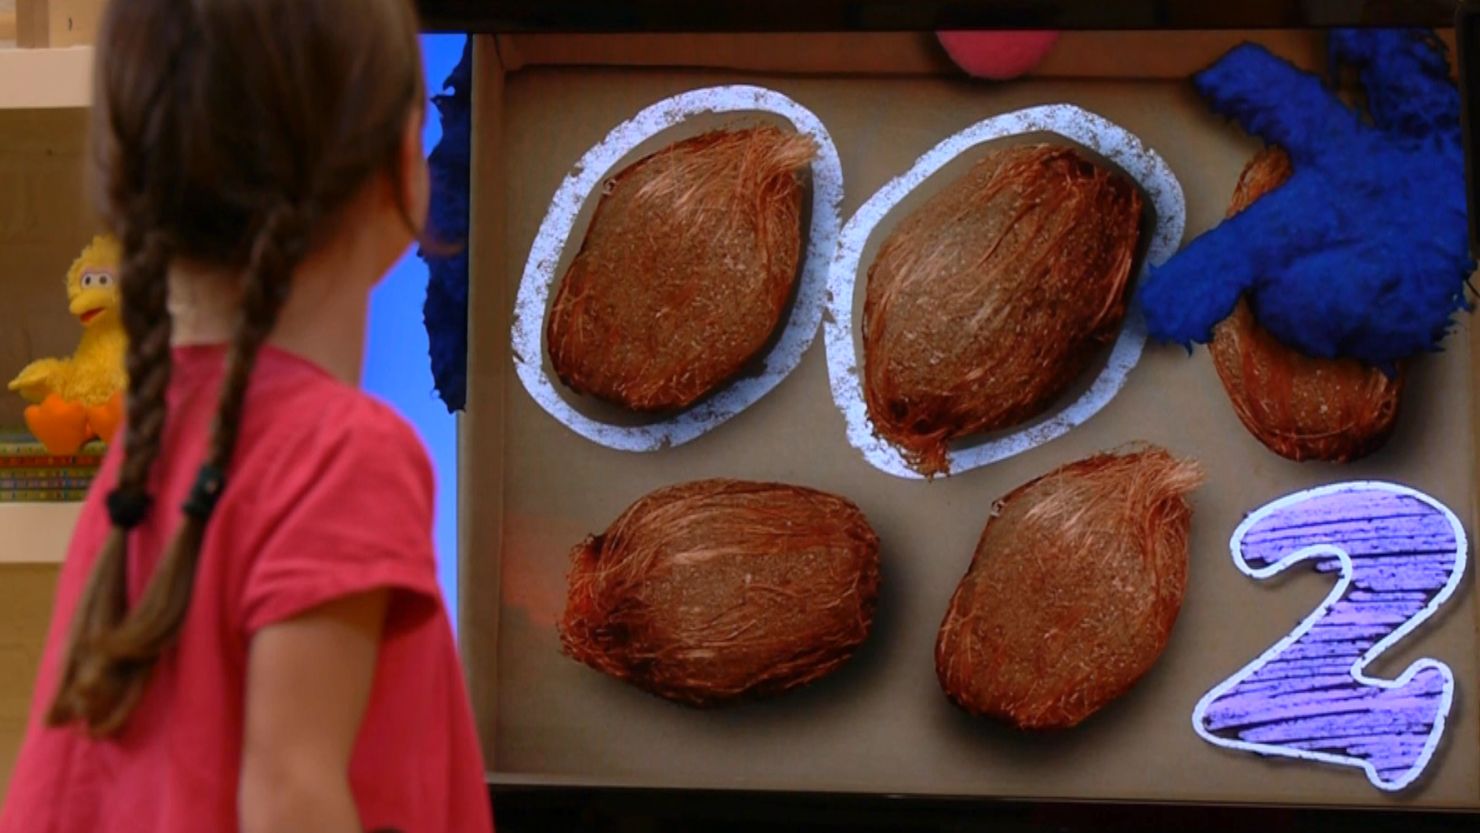 In "Kinect Sesame Street TV," characters will ask viewers questions about, say, how many coconuts are displayed.